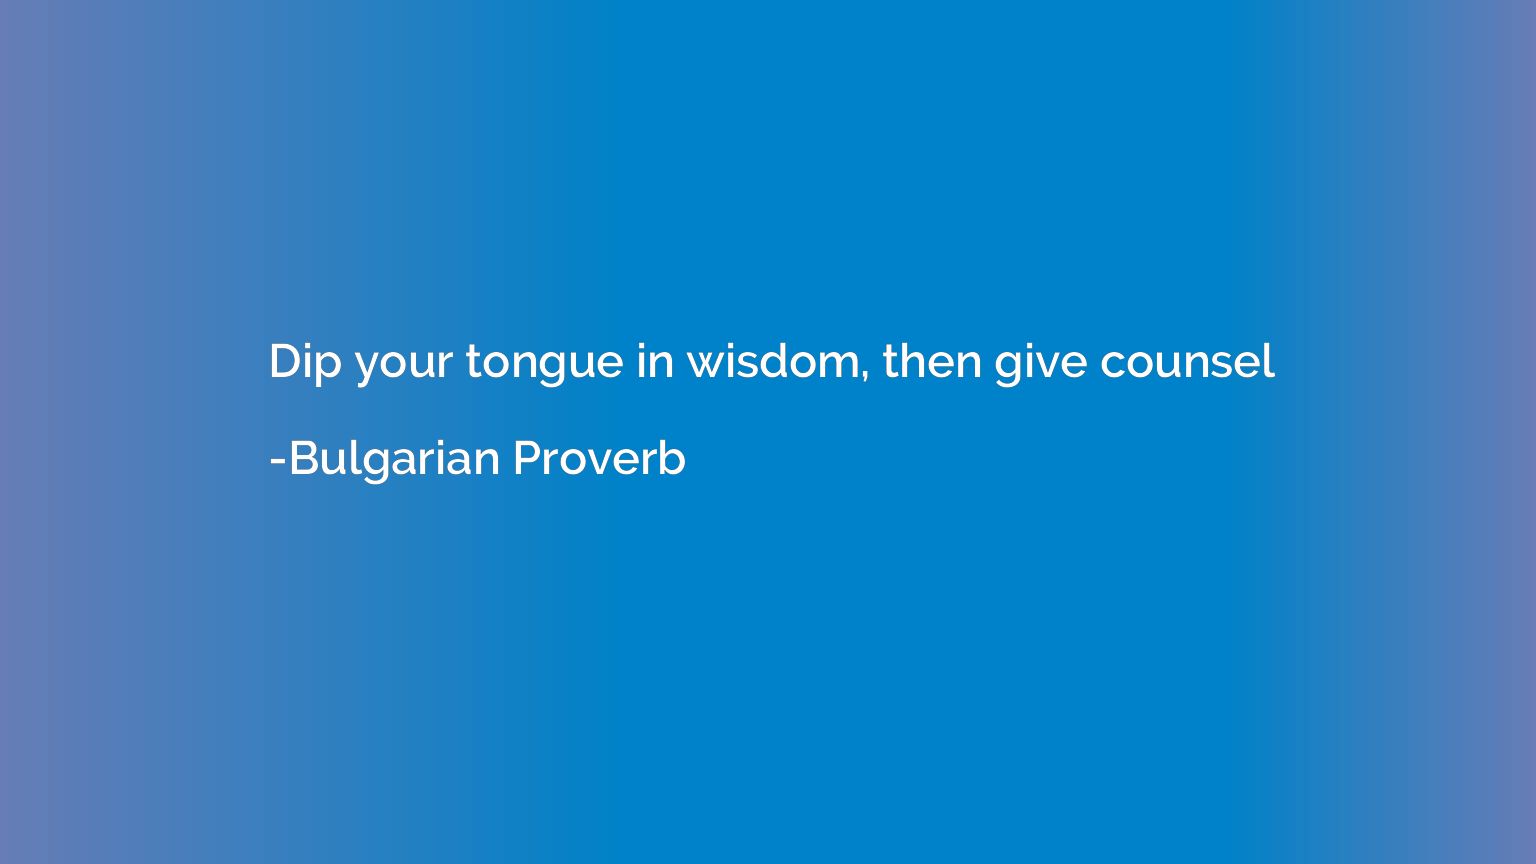 Dip your tongue in wisdom, then give counsel